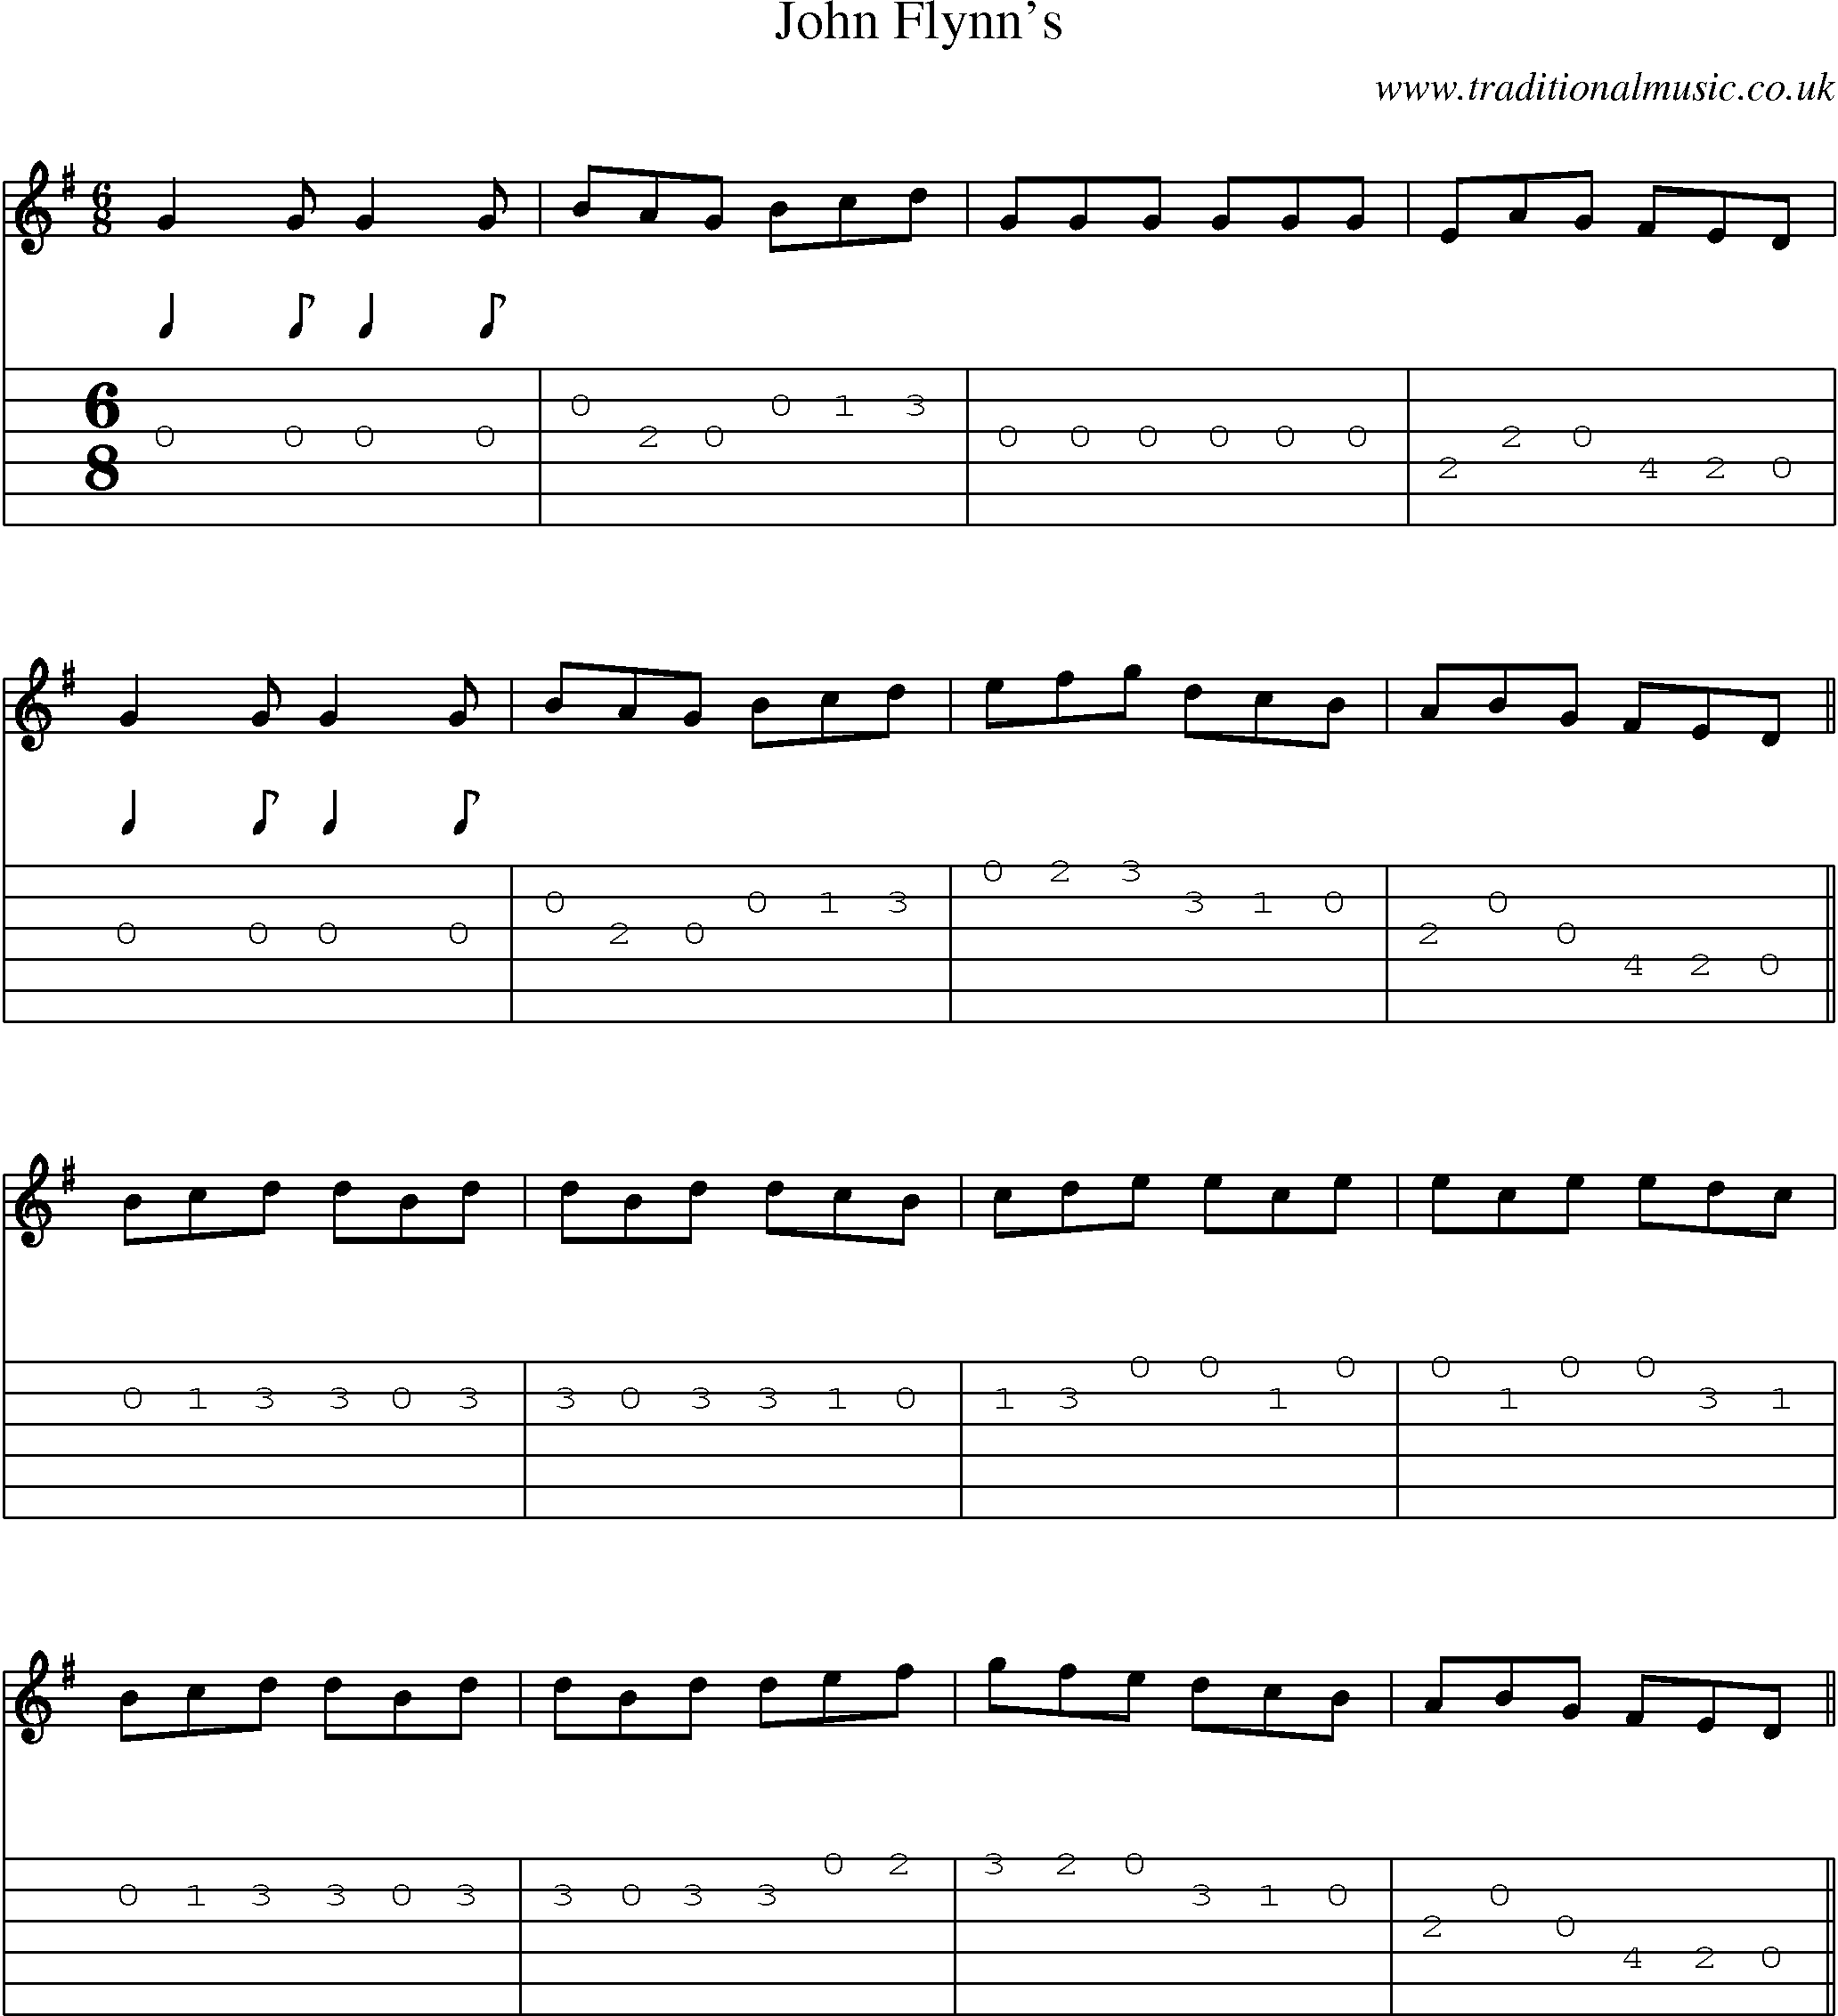 Music Score and Guitar Tabs for John Flynns